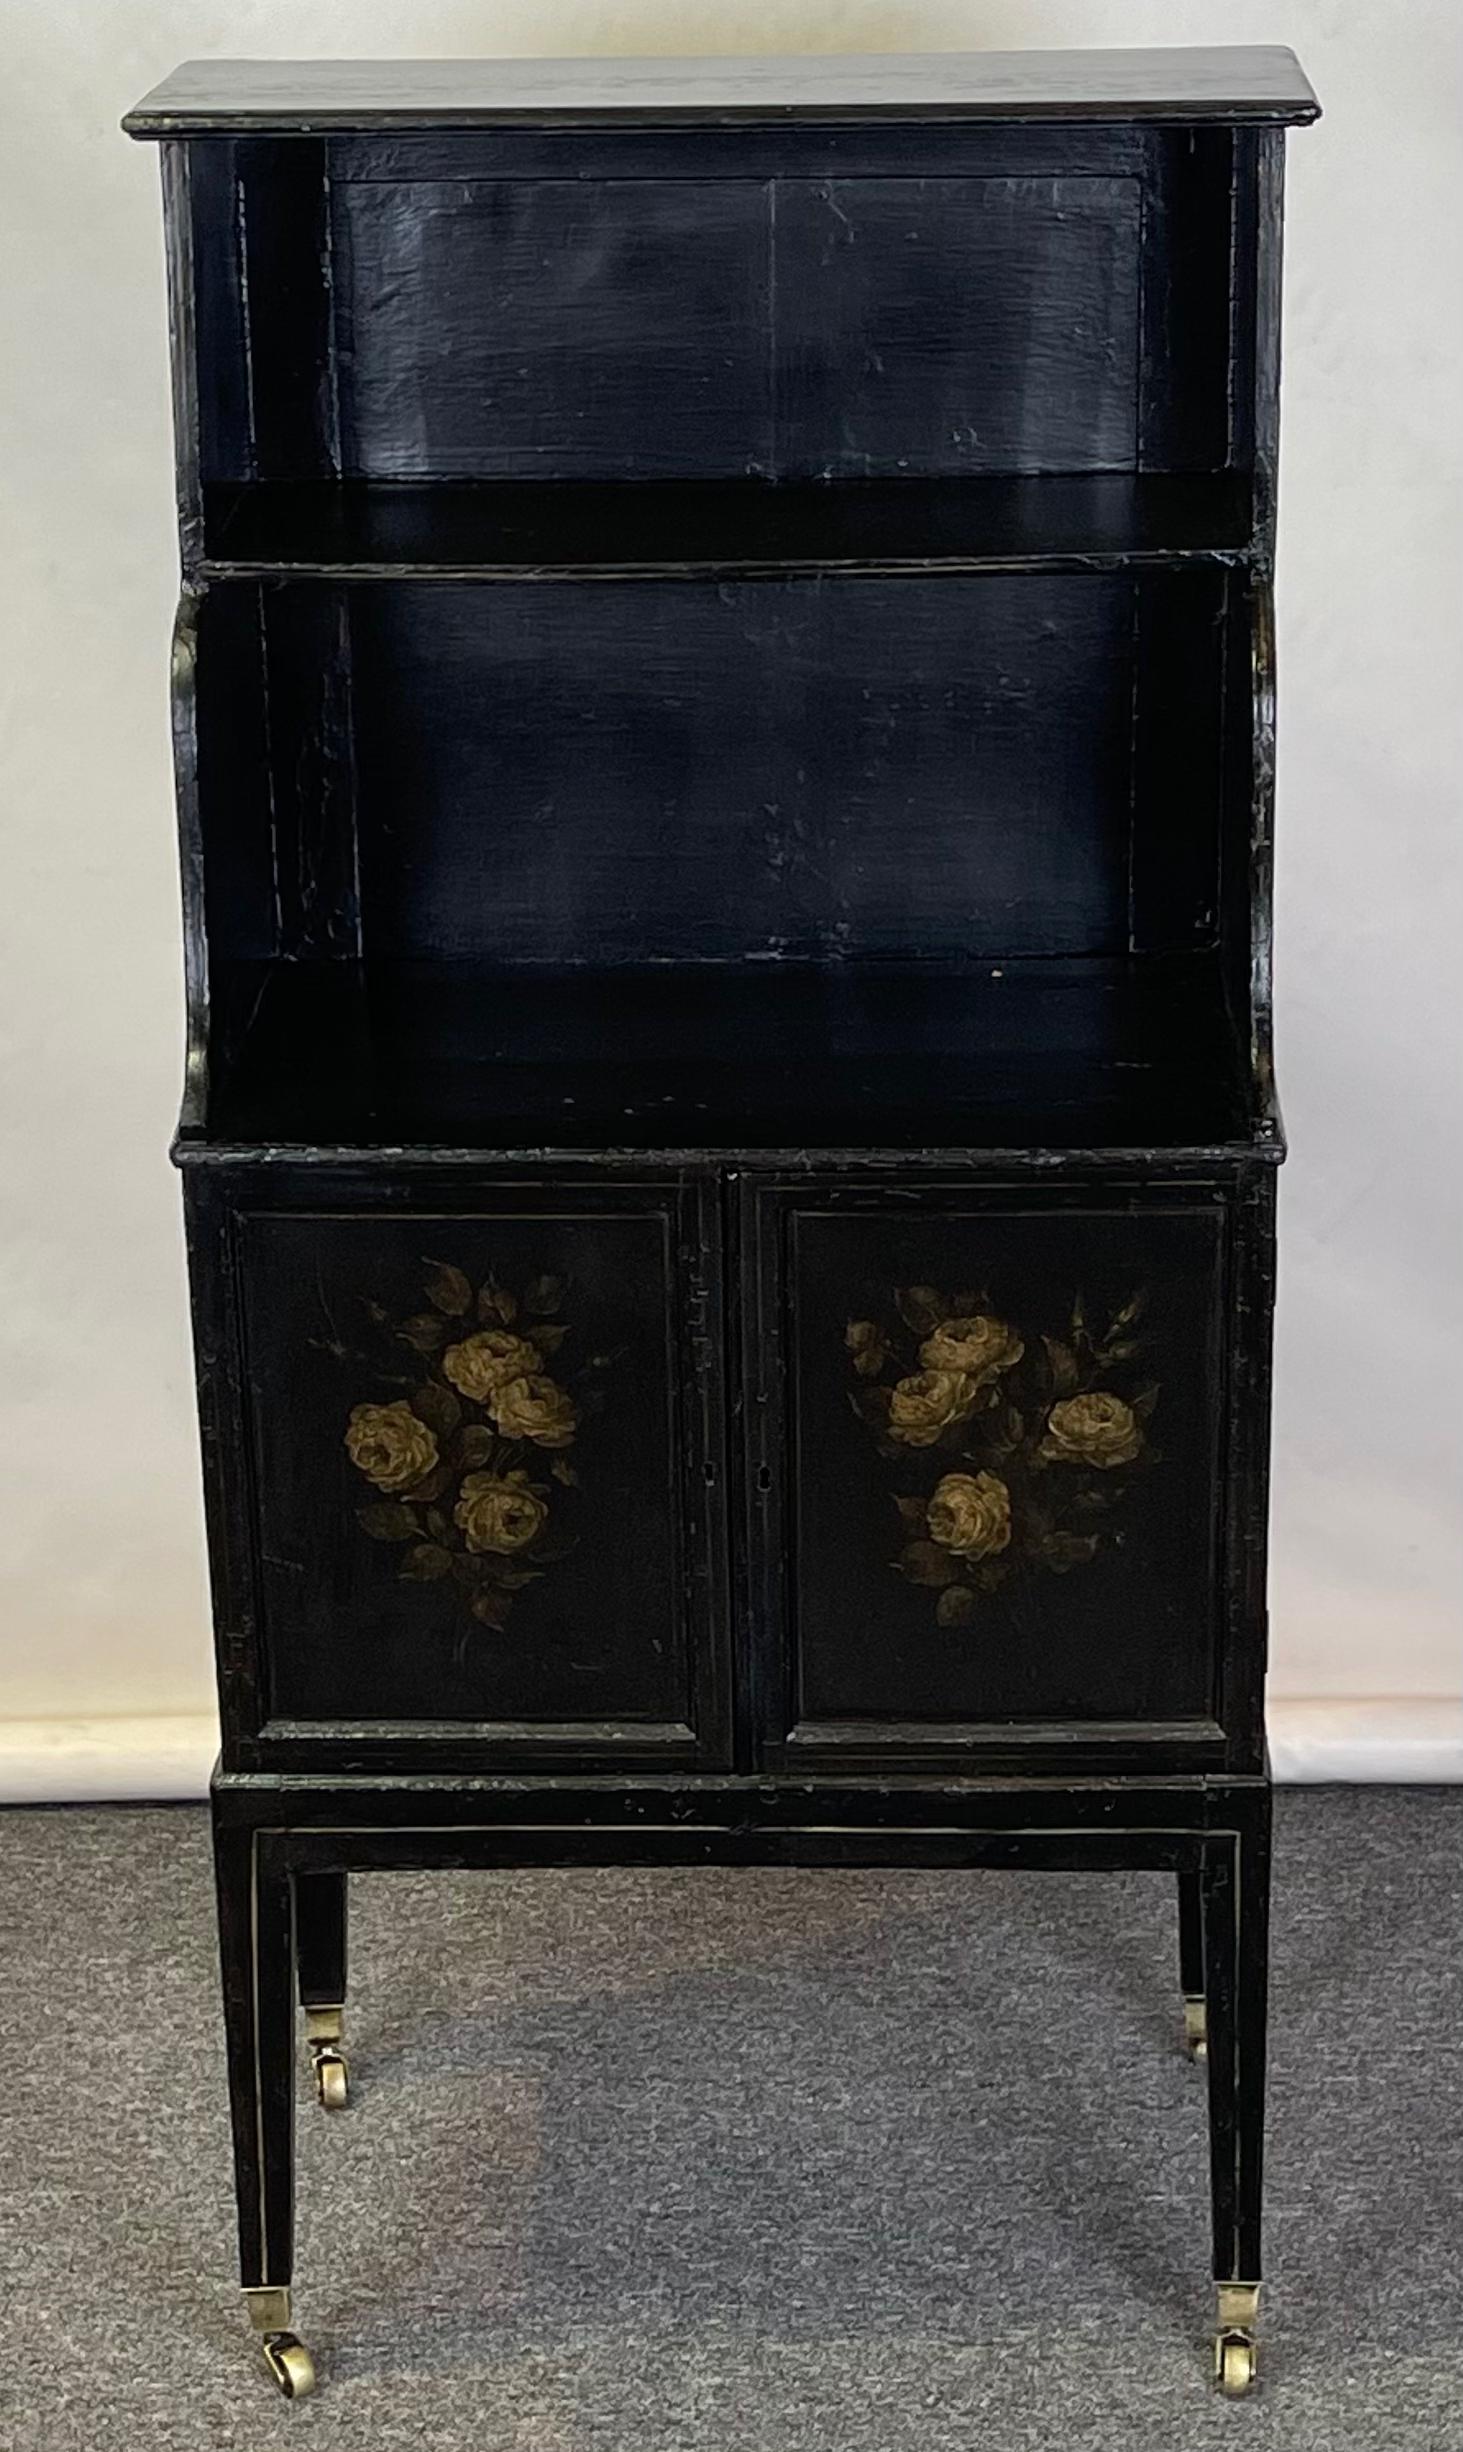 An small and charming early 19th C. English ebonized and paint decorated two-shelf bookcase cabinet on square tapering legs terminating in brass casters.